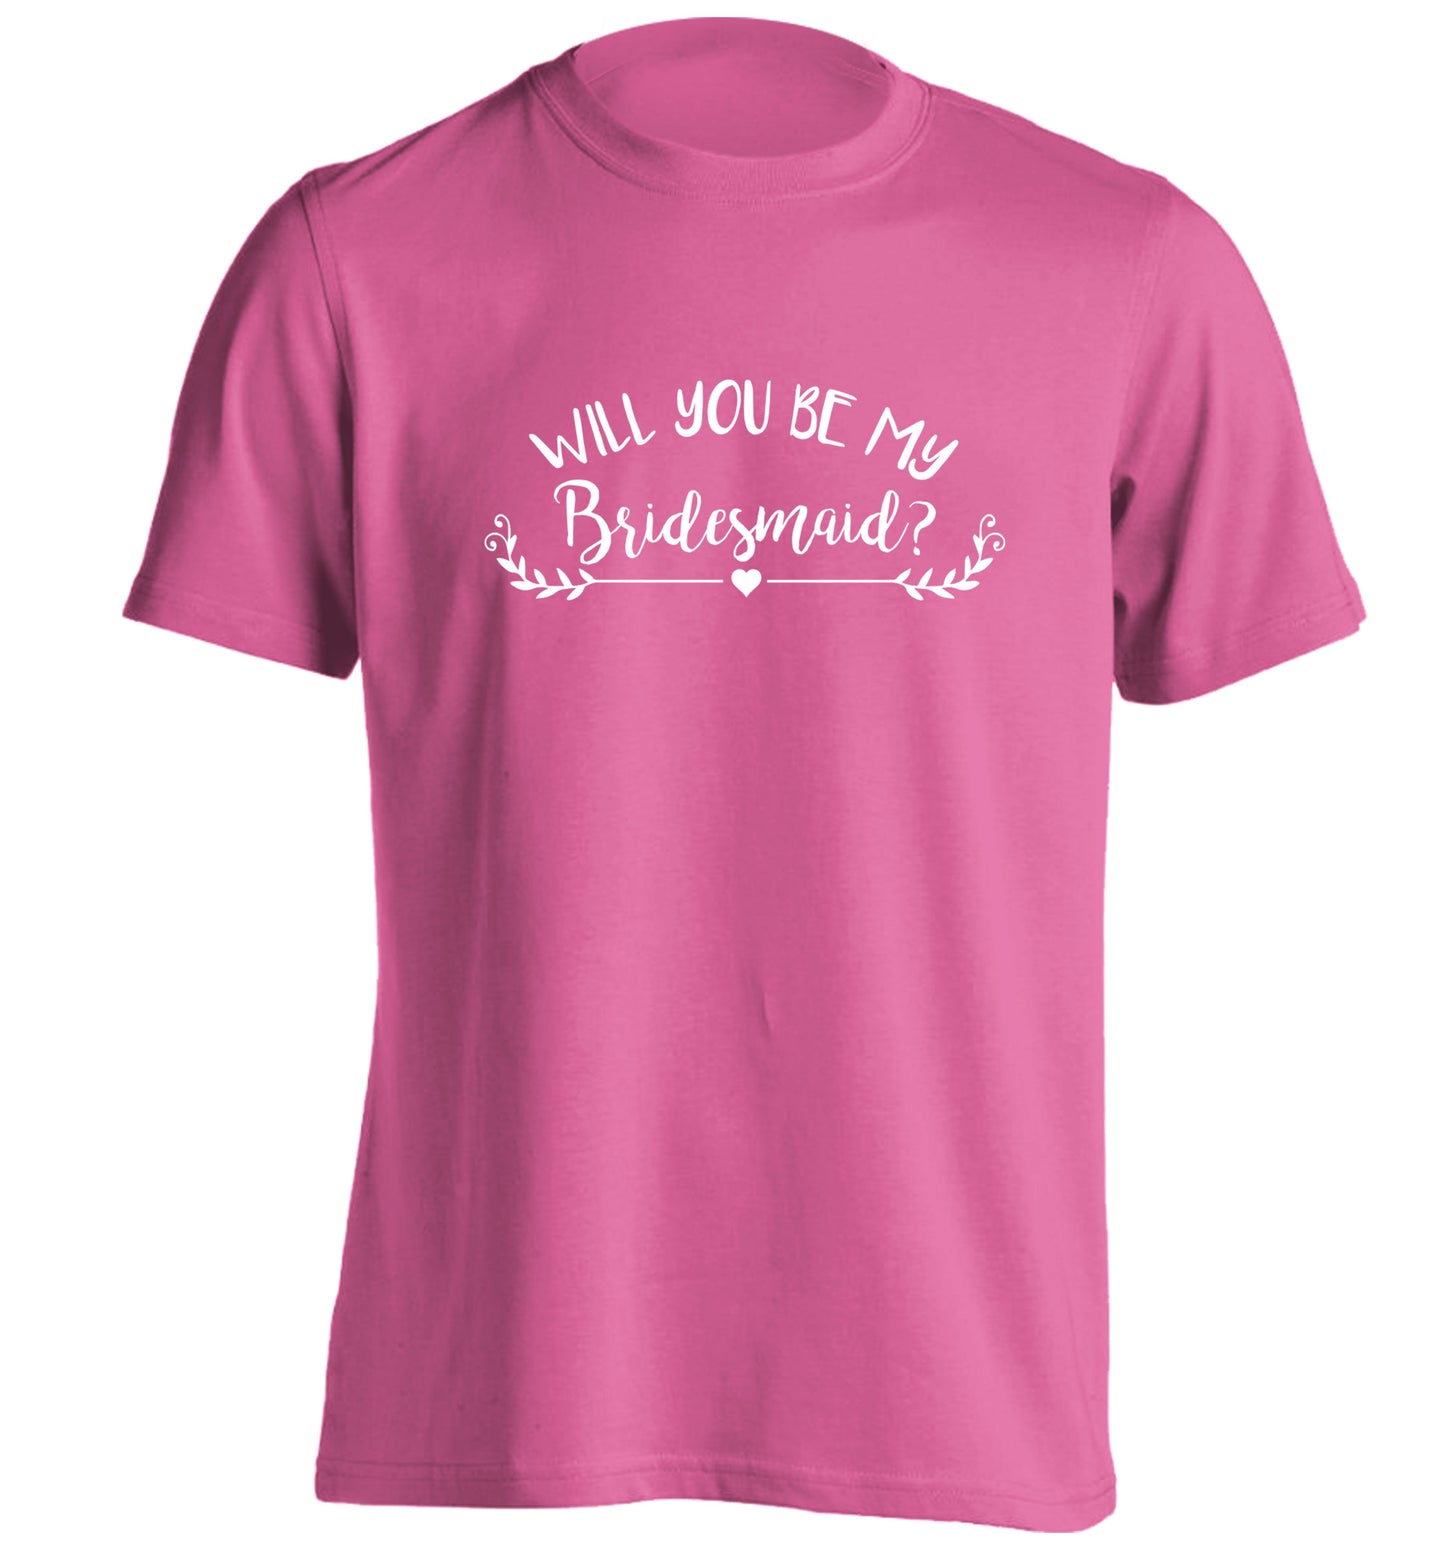 Will you be my bridesmaid? adults unisex pink Tshirt 2XL